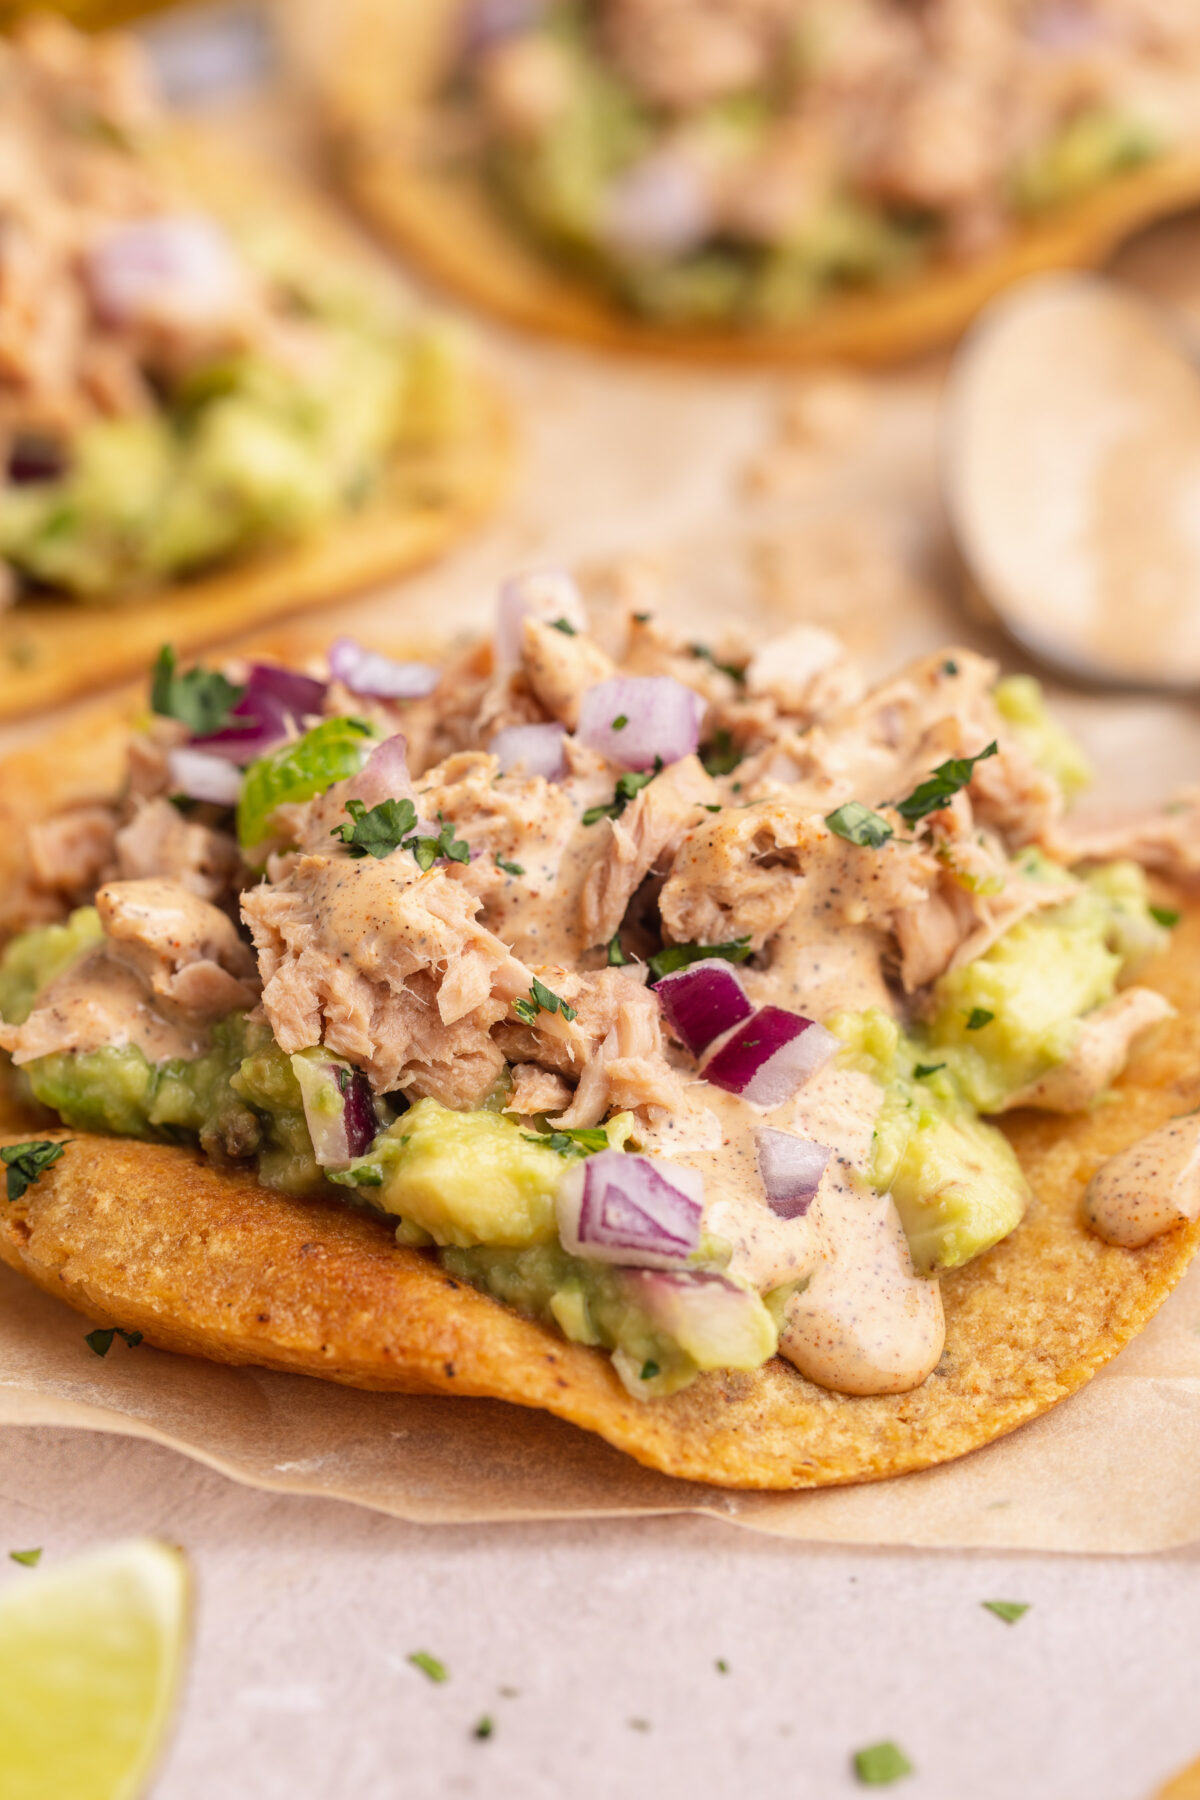 Side view of a crisp tostada topped with tuna, guac, and fresh toppings.